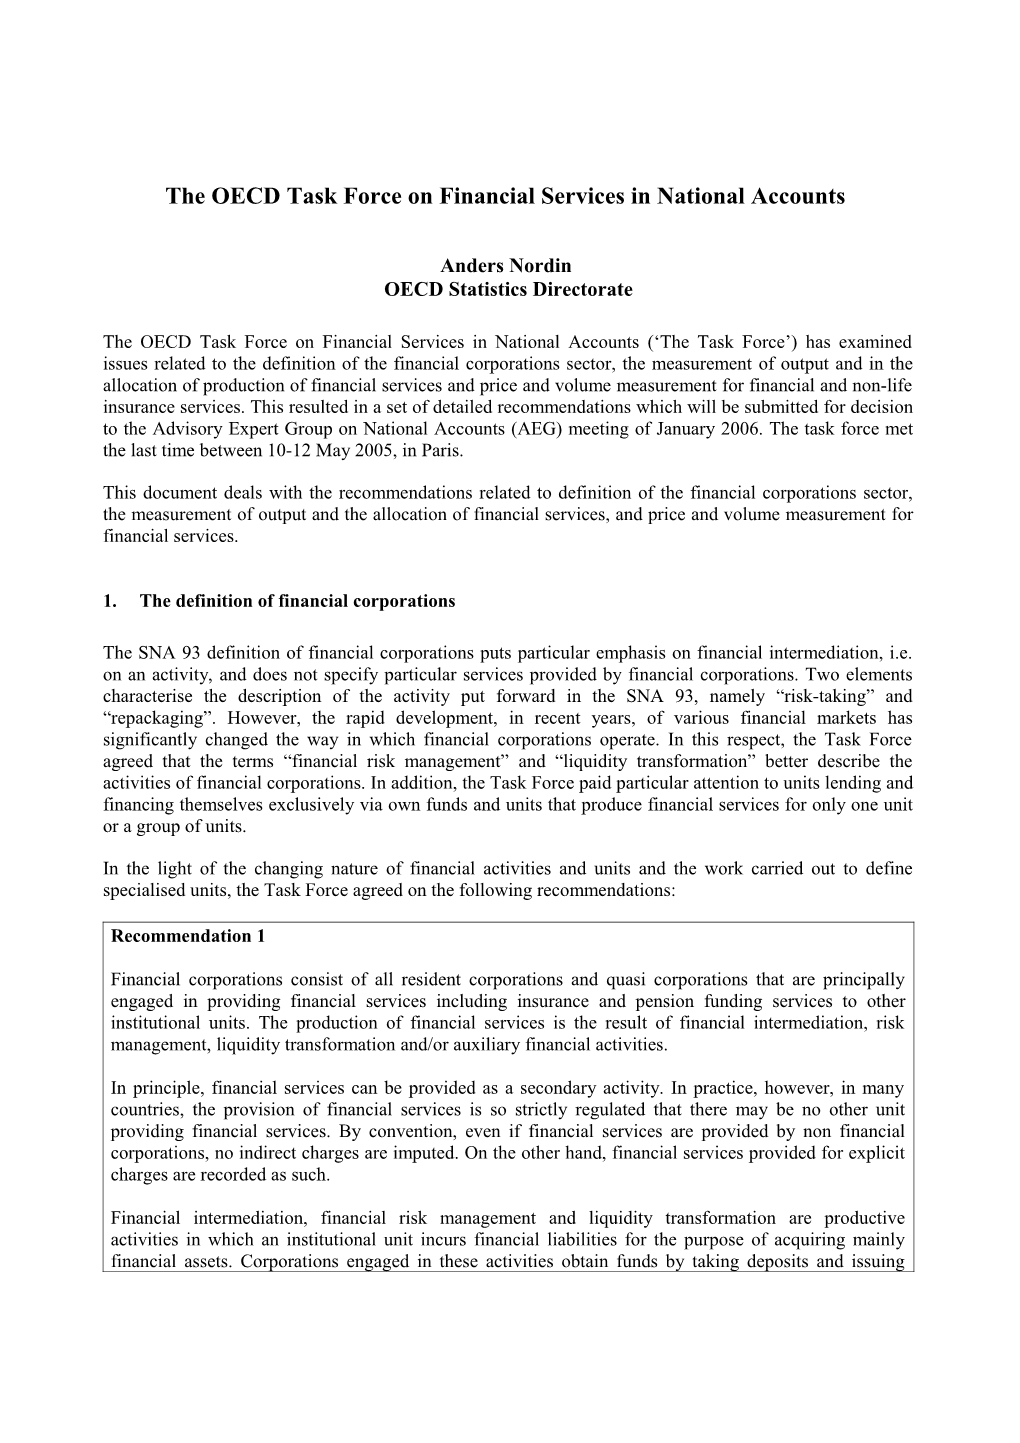 Information Paper for the July 2005 AEG Meeting